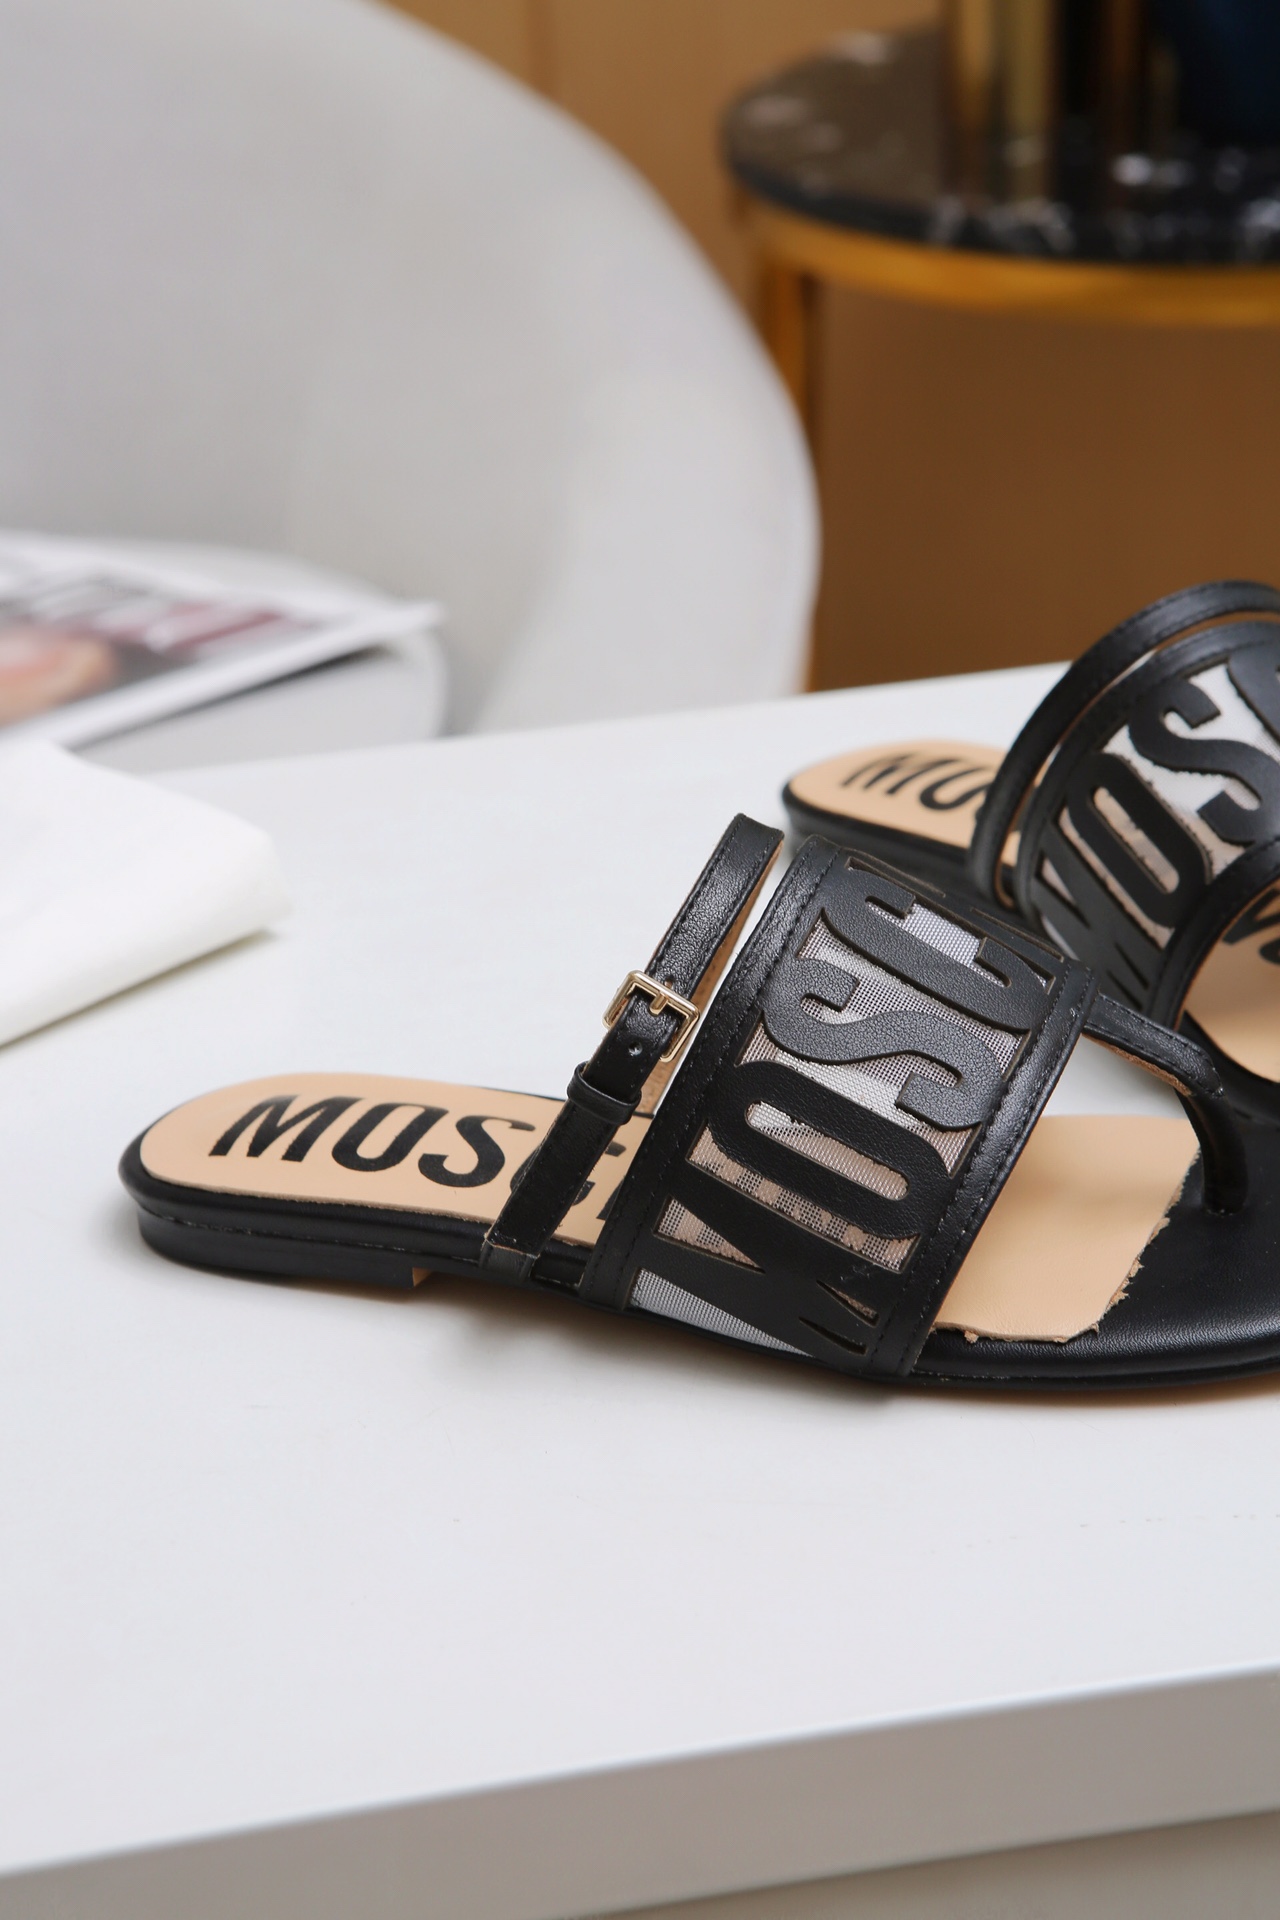 Moschino Slide Sandals For Women # 250992, cheap Moschino Sandals, only $69!